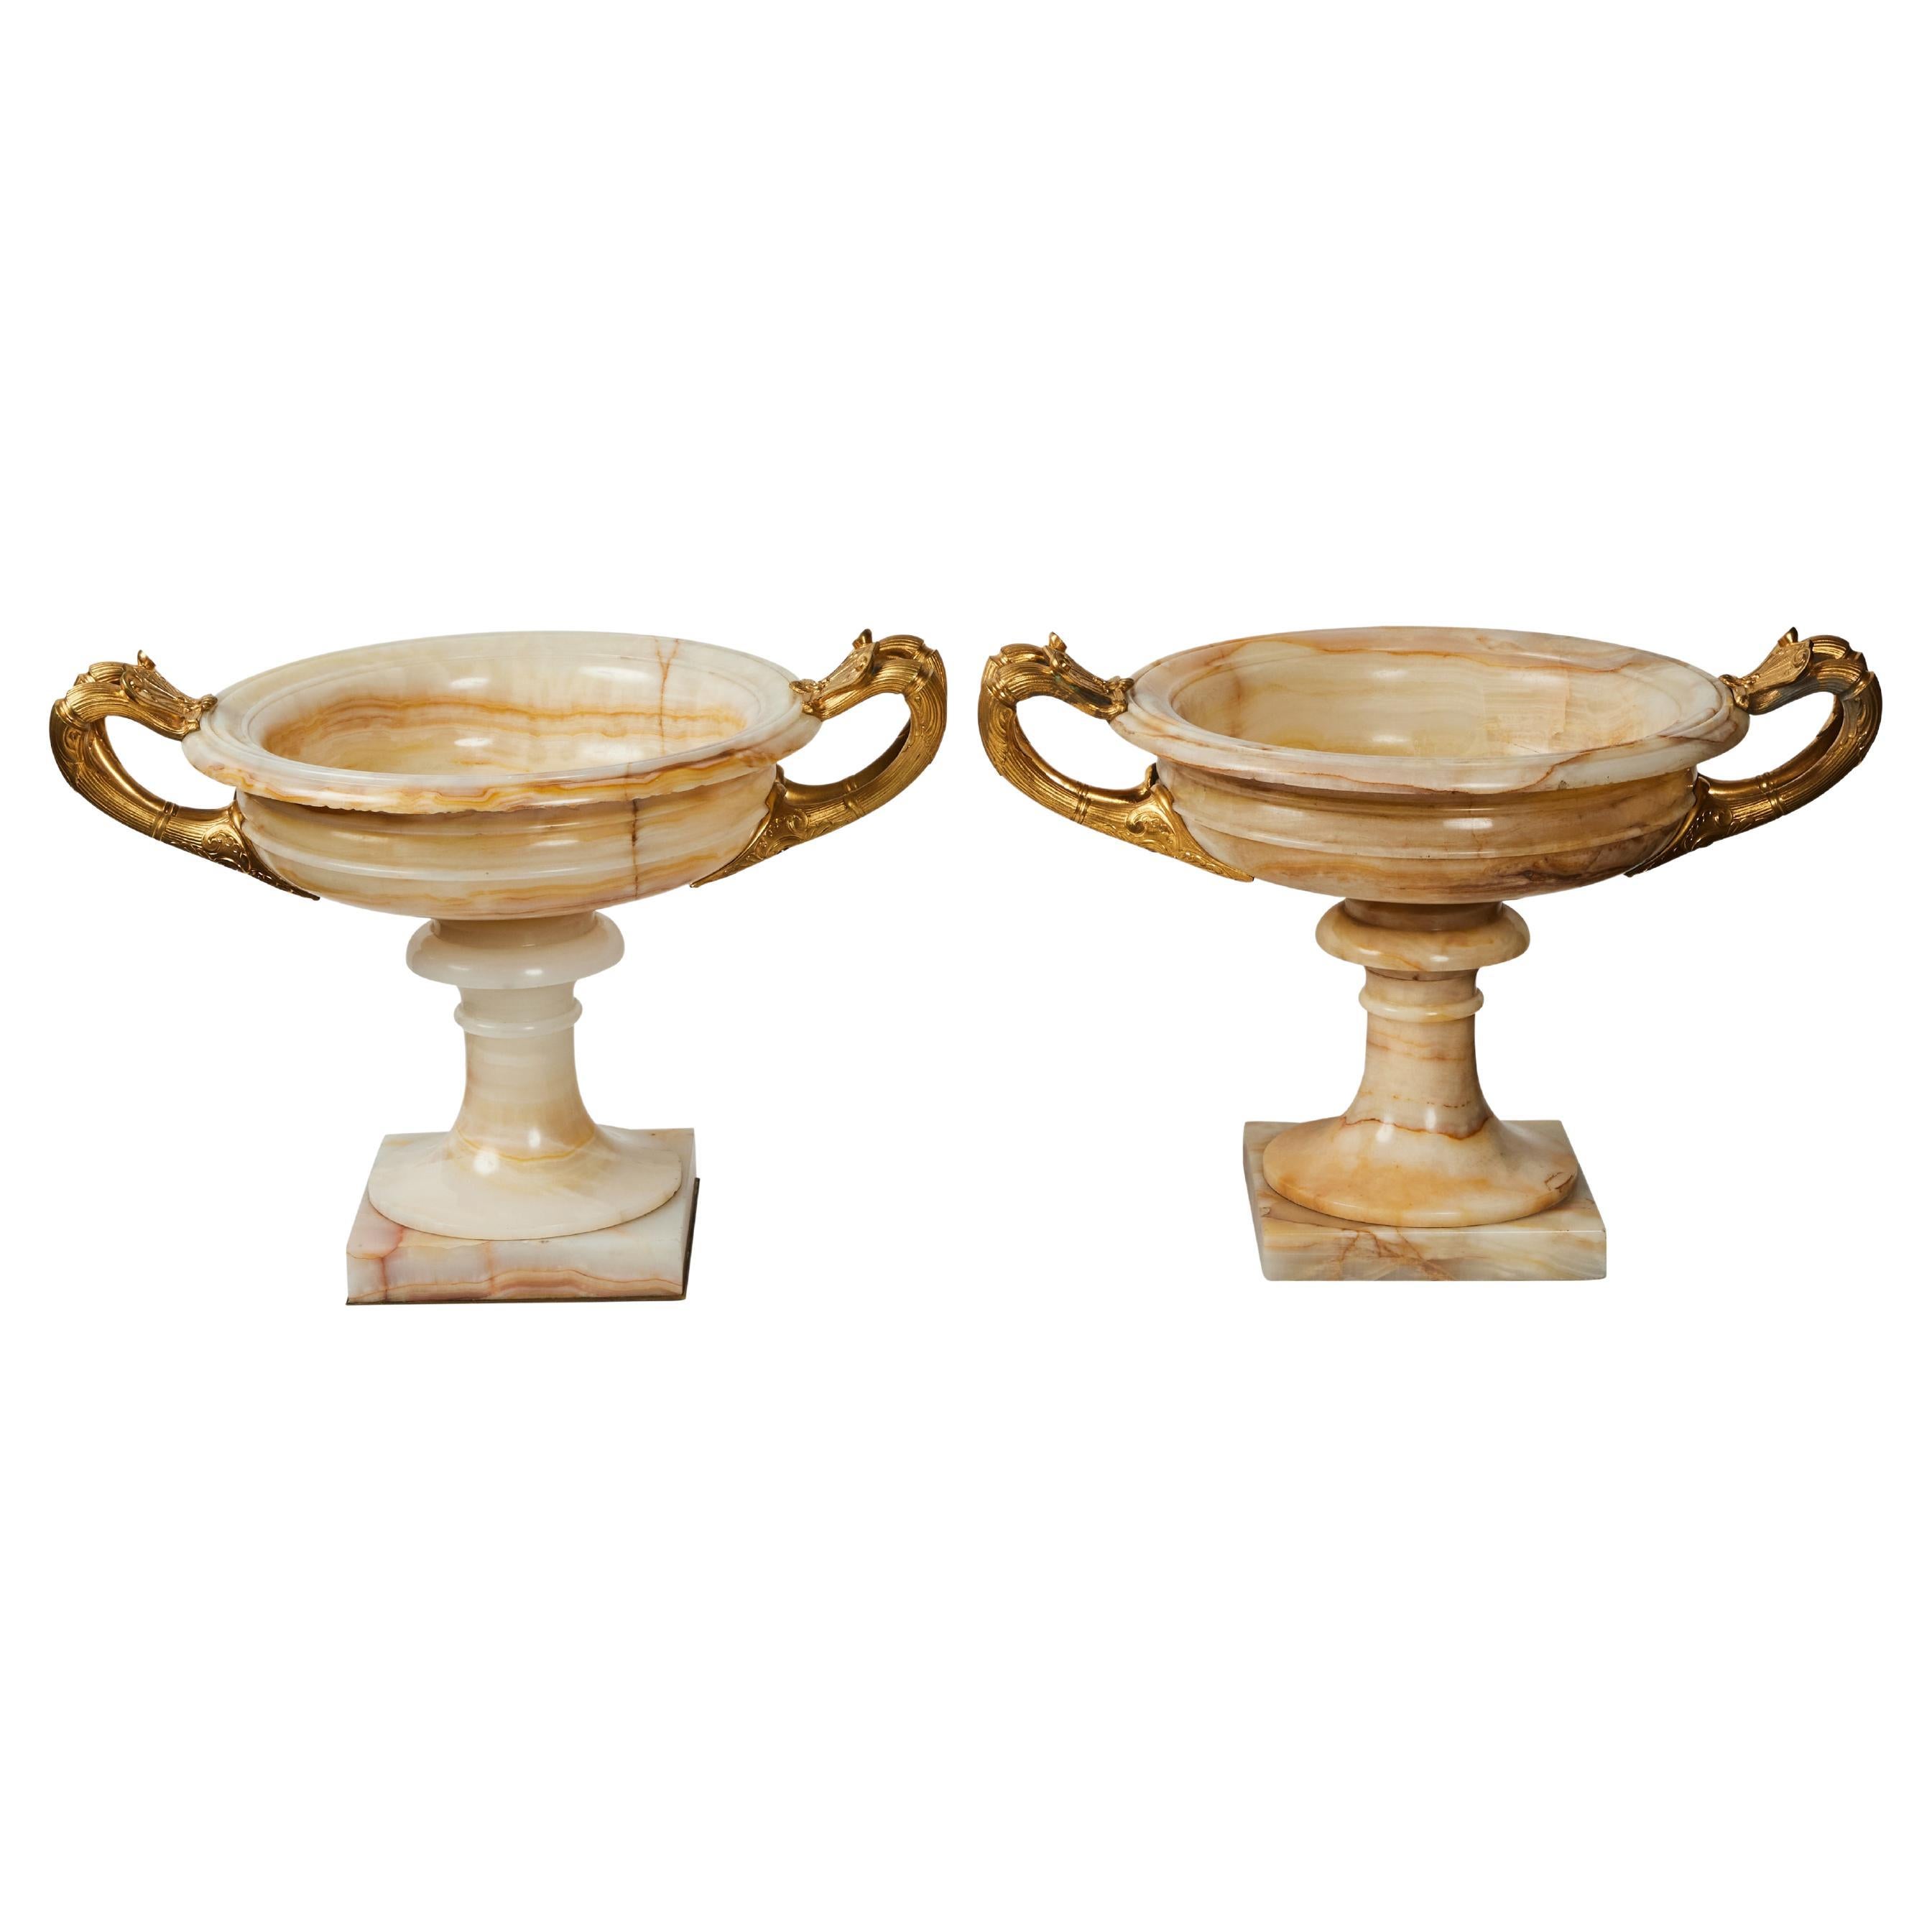 Pair of French Empire Style Onyx and Gilded Bronze Tazzas For Sale